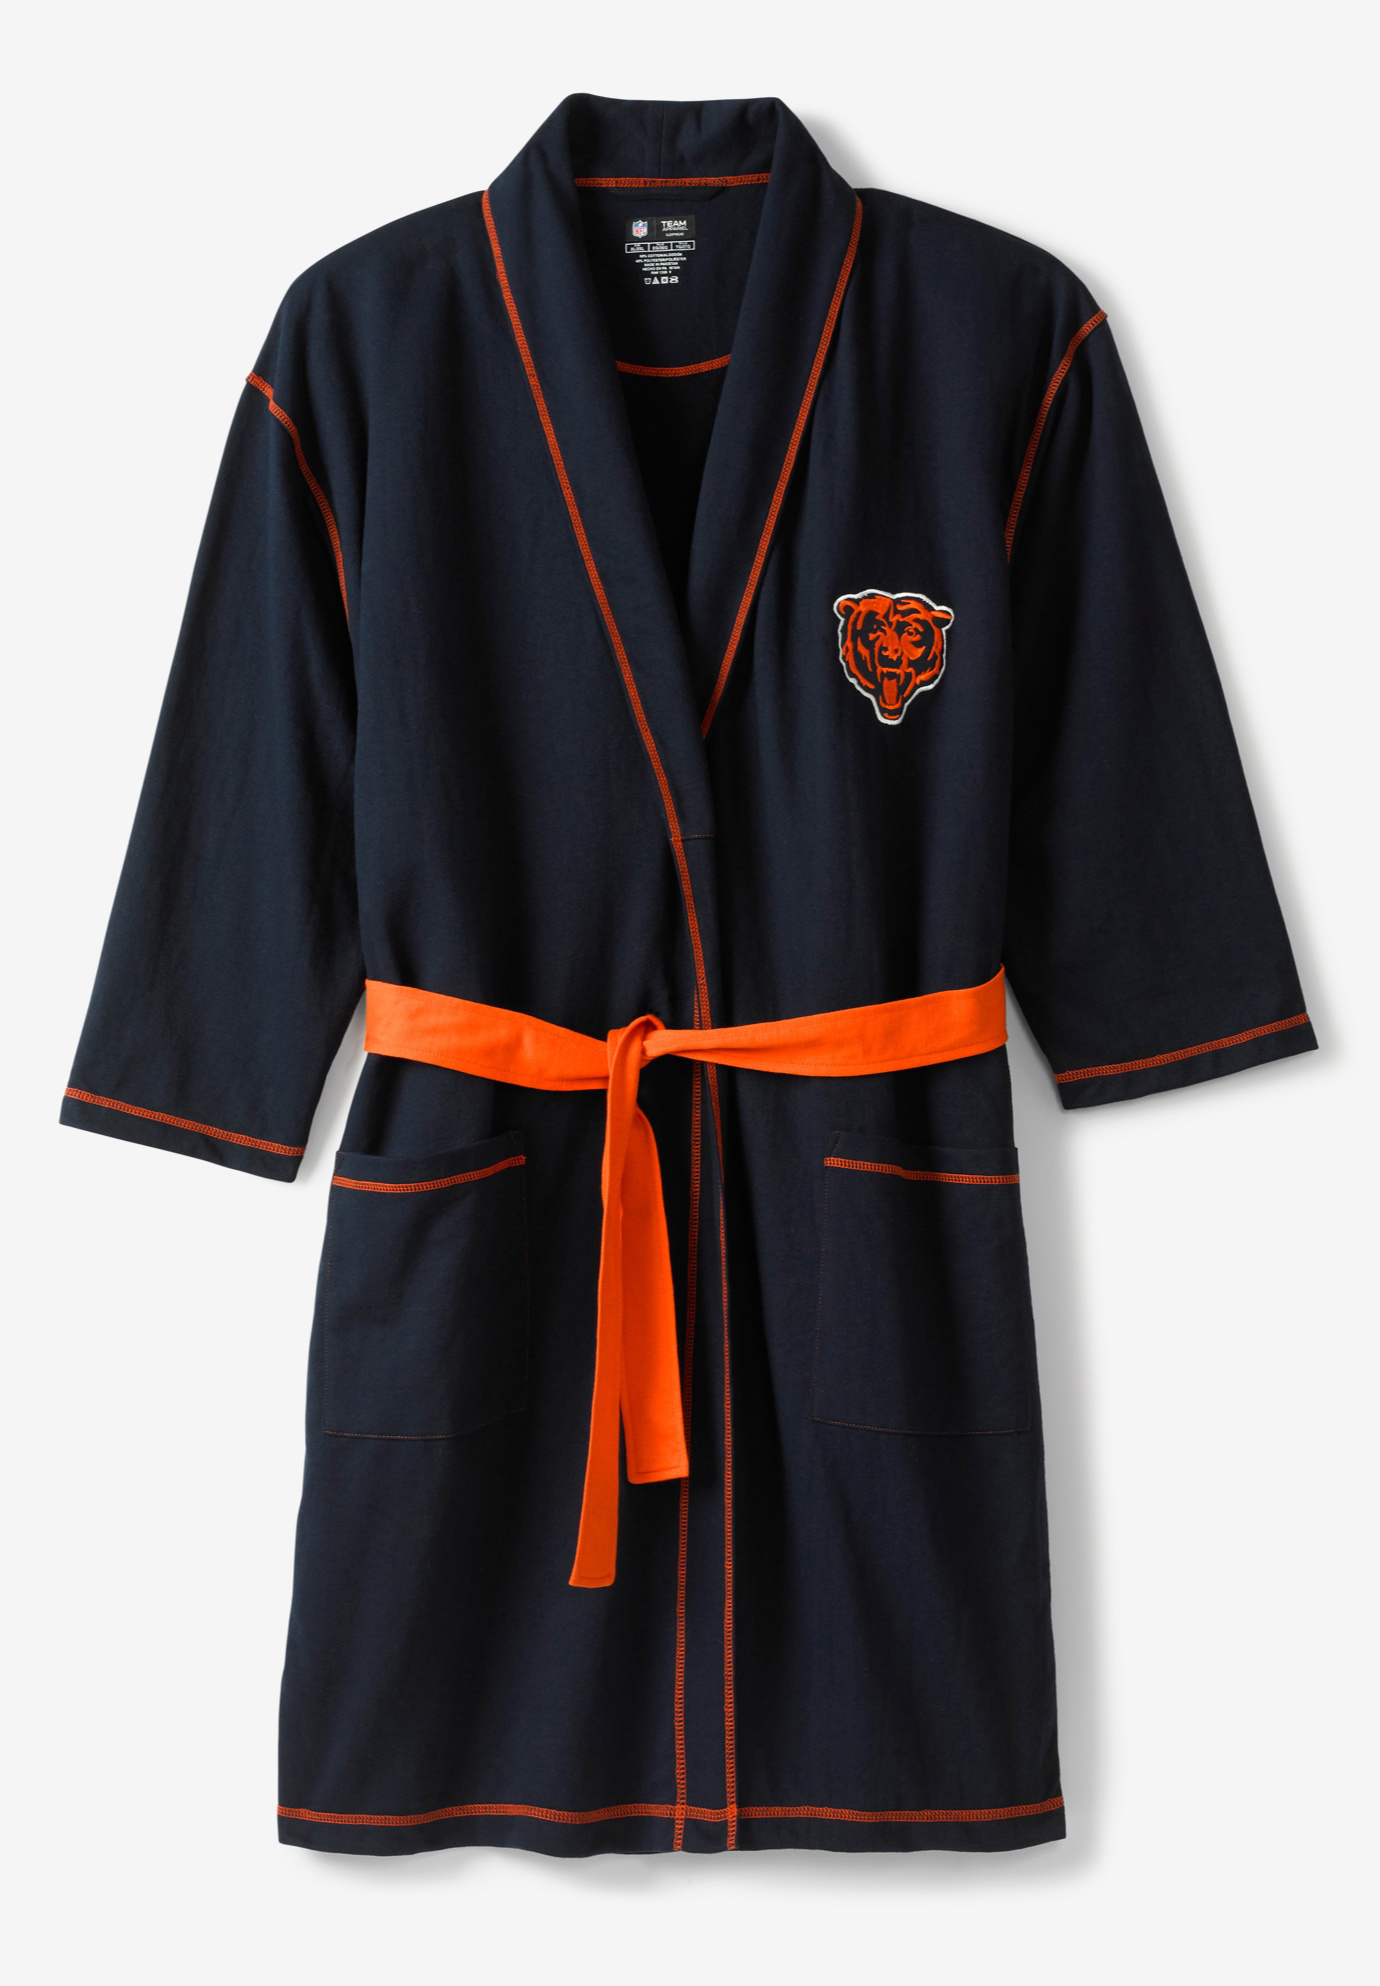 NFL French Terry Robe, 